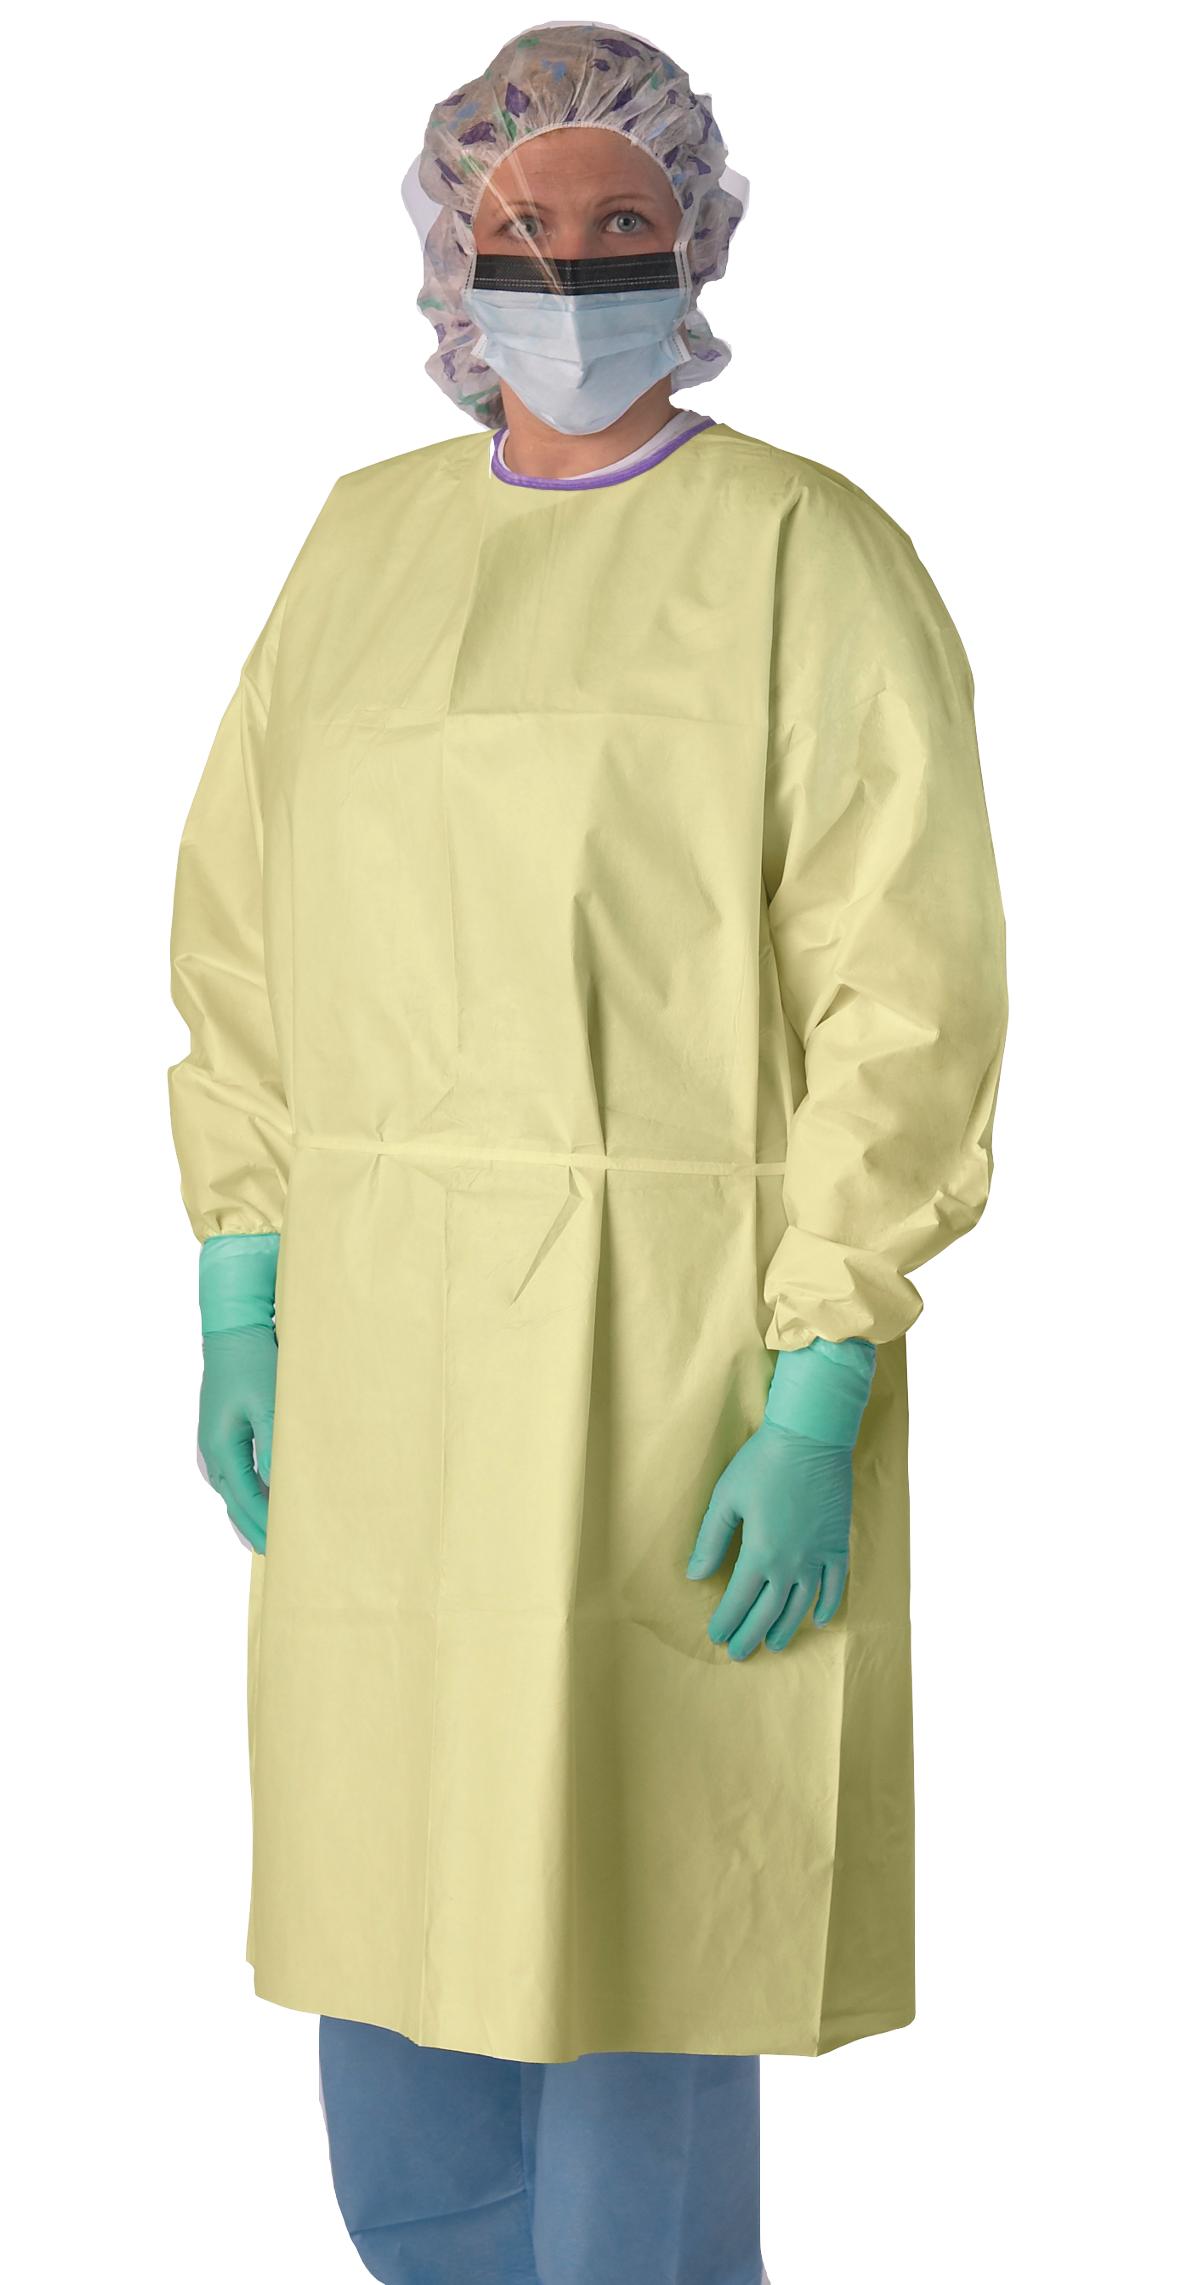 Disposable NonReinforced Surgical Gown wTowel XL Unisex AAMI Level 3  Sterile Blue  DDP Medical Supply